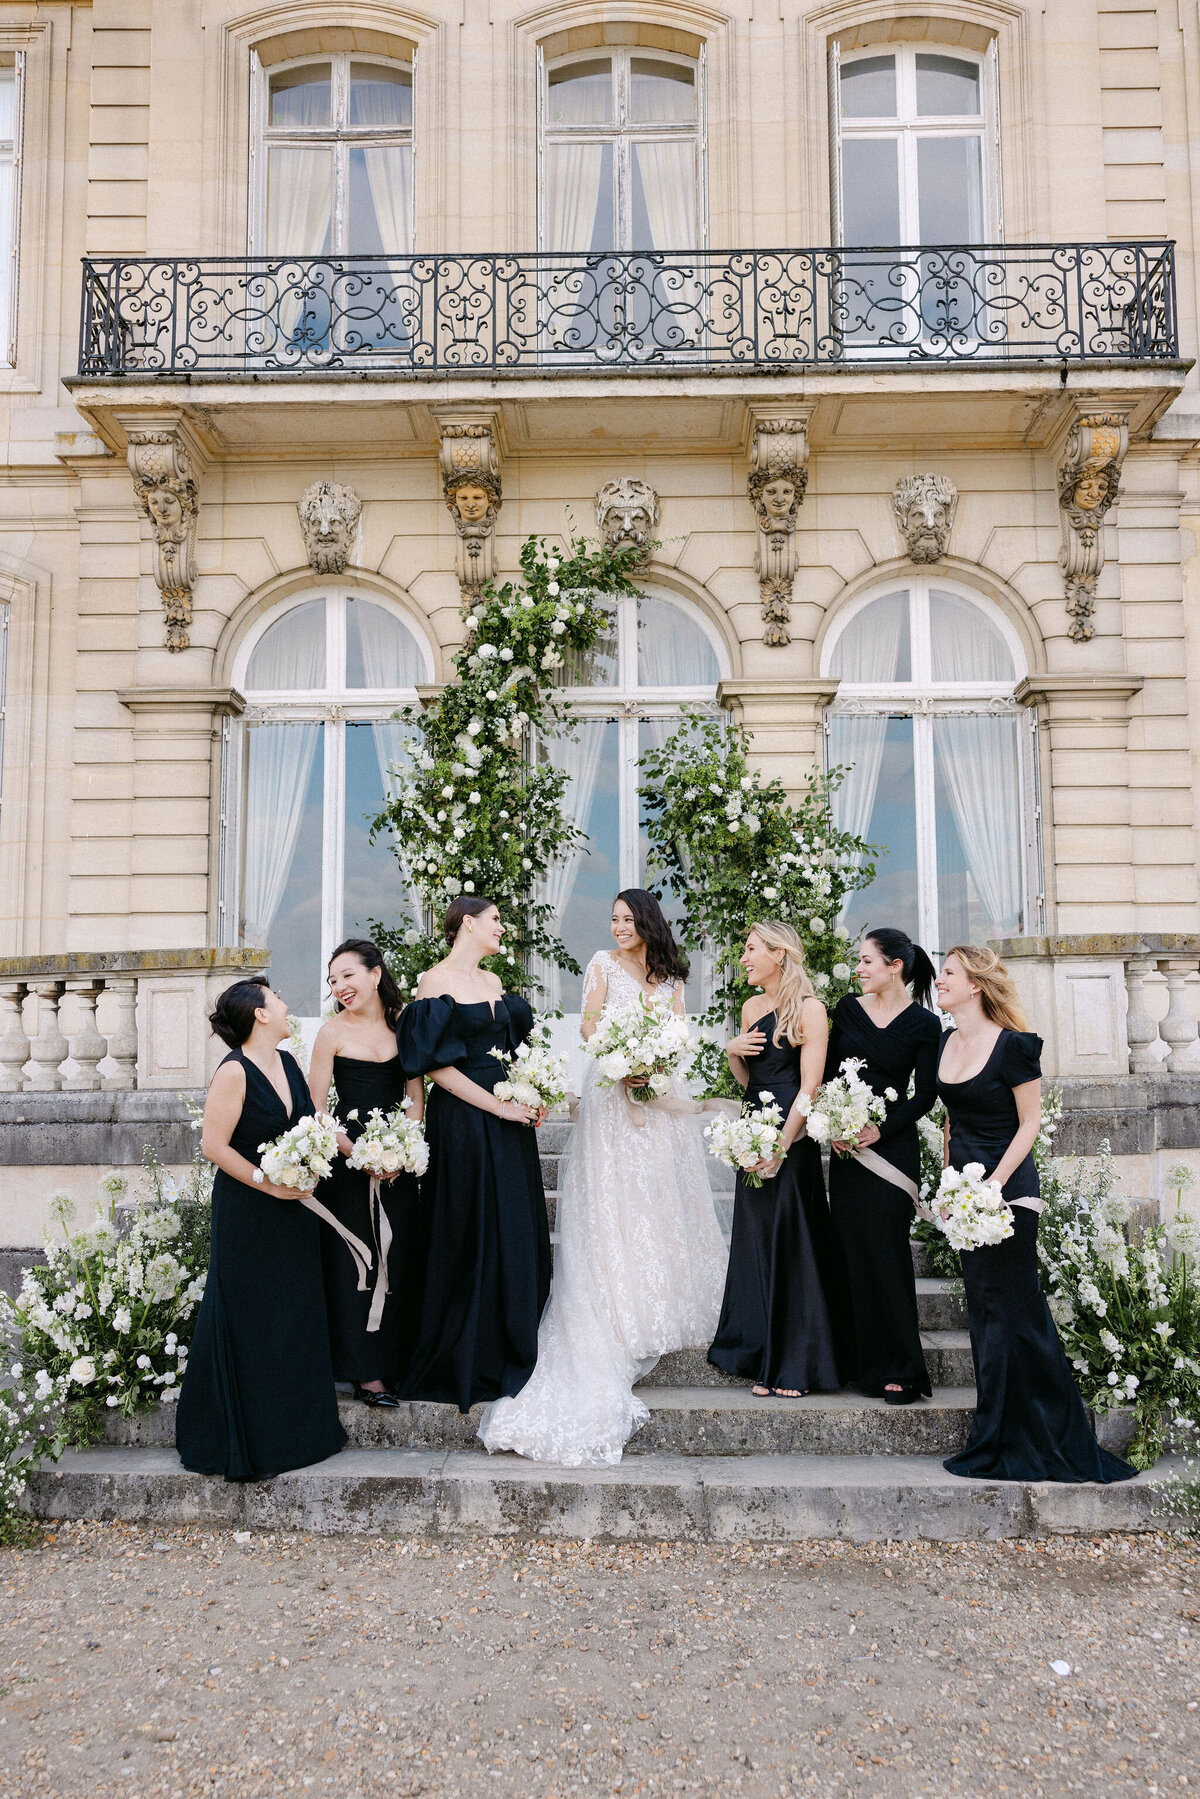 Jennifer Fox Weddings English speaking wedding planning & design agency in France crafting refined and bespoke weddings and celebrations Provence, Paris and destination 376